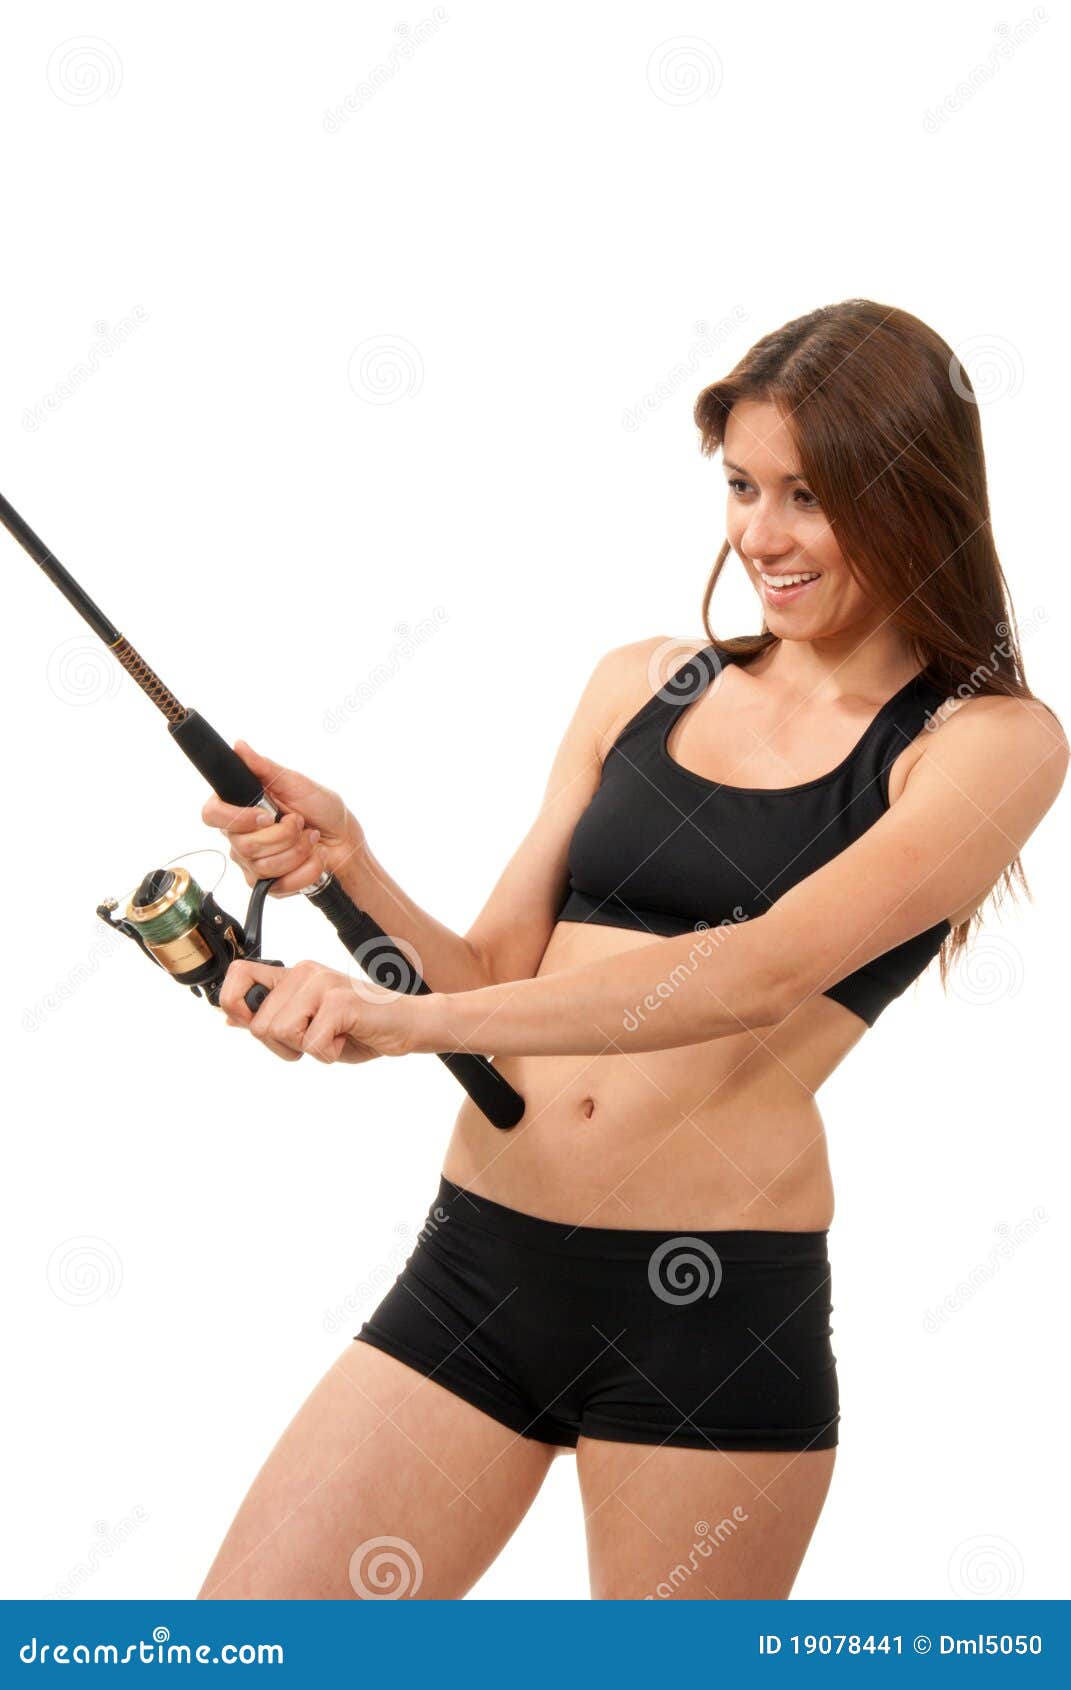 Fishing Rod and Expensive Reel Fish on Stock Image - Image of active,  hobby: 19078441